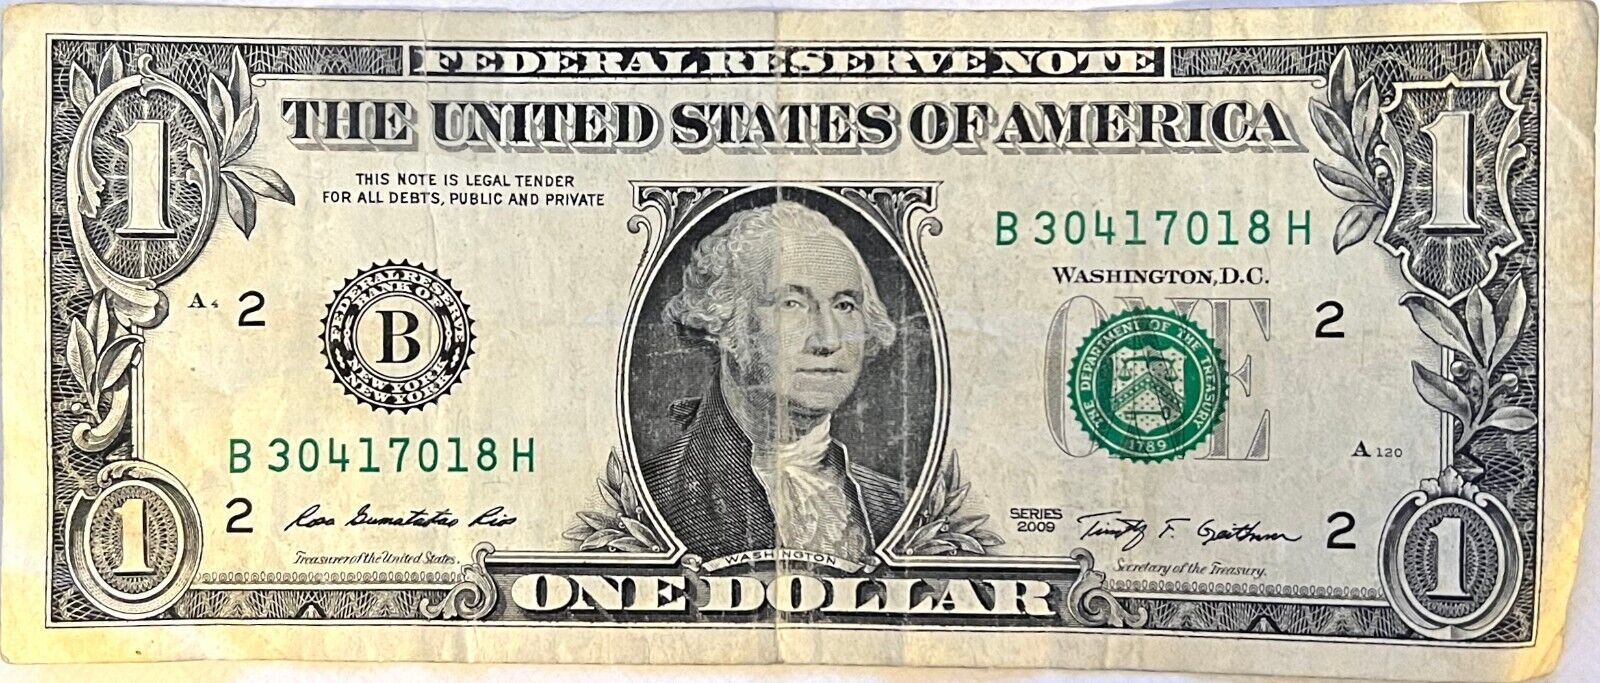 Primary image for $1 One Dollar Bill 30417018, Dauphin, PA ZIP code: 17018